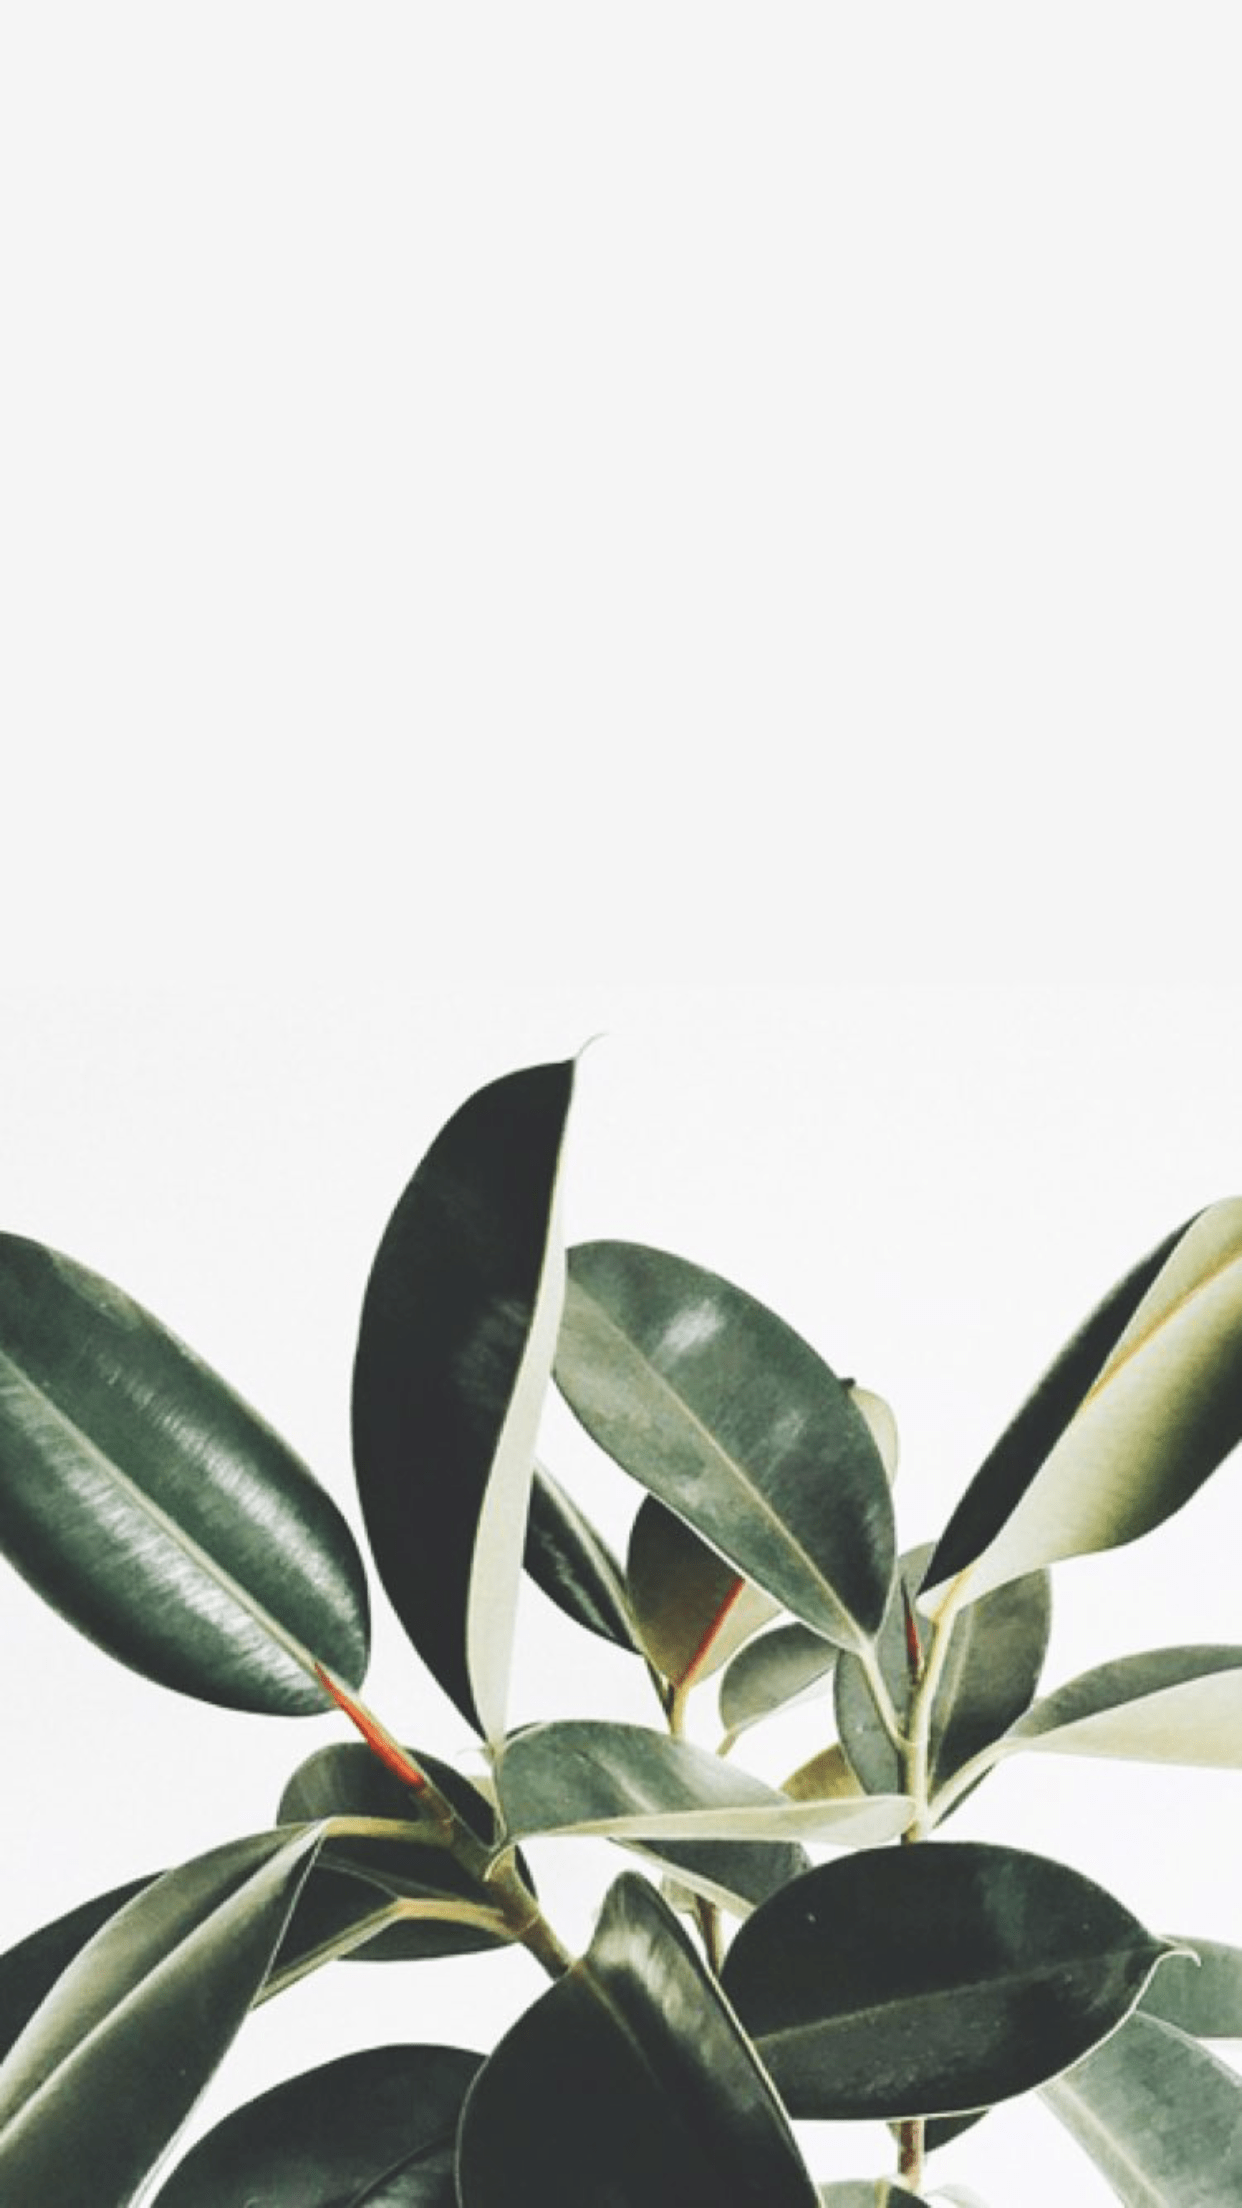 Download wallpaper 1350x2400 plant, foliage, indoor, houseplant iphone  8+/7+/6s+/6+ for parallax hd background